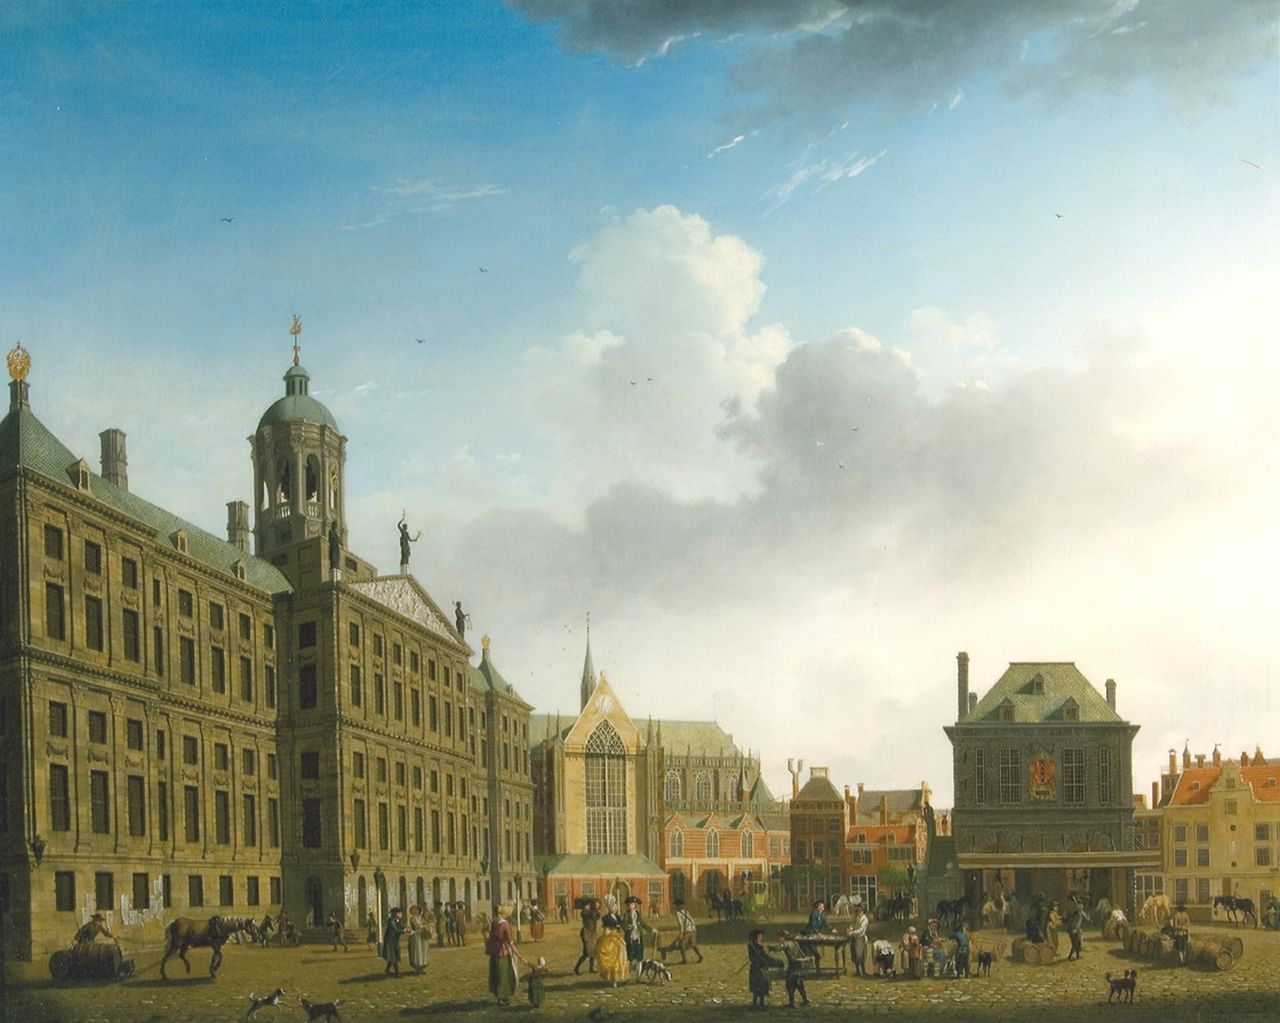 Ouwater I.  | Isaac Ouwater, The Dam with the City hall and the Waag, Amsterdam, oil on canvas 61.6 x 77.8 cm, signed l.r. and dated 1782